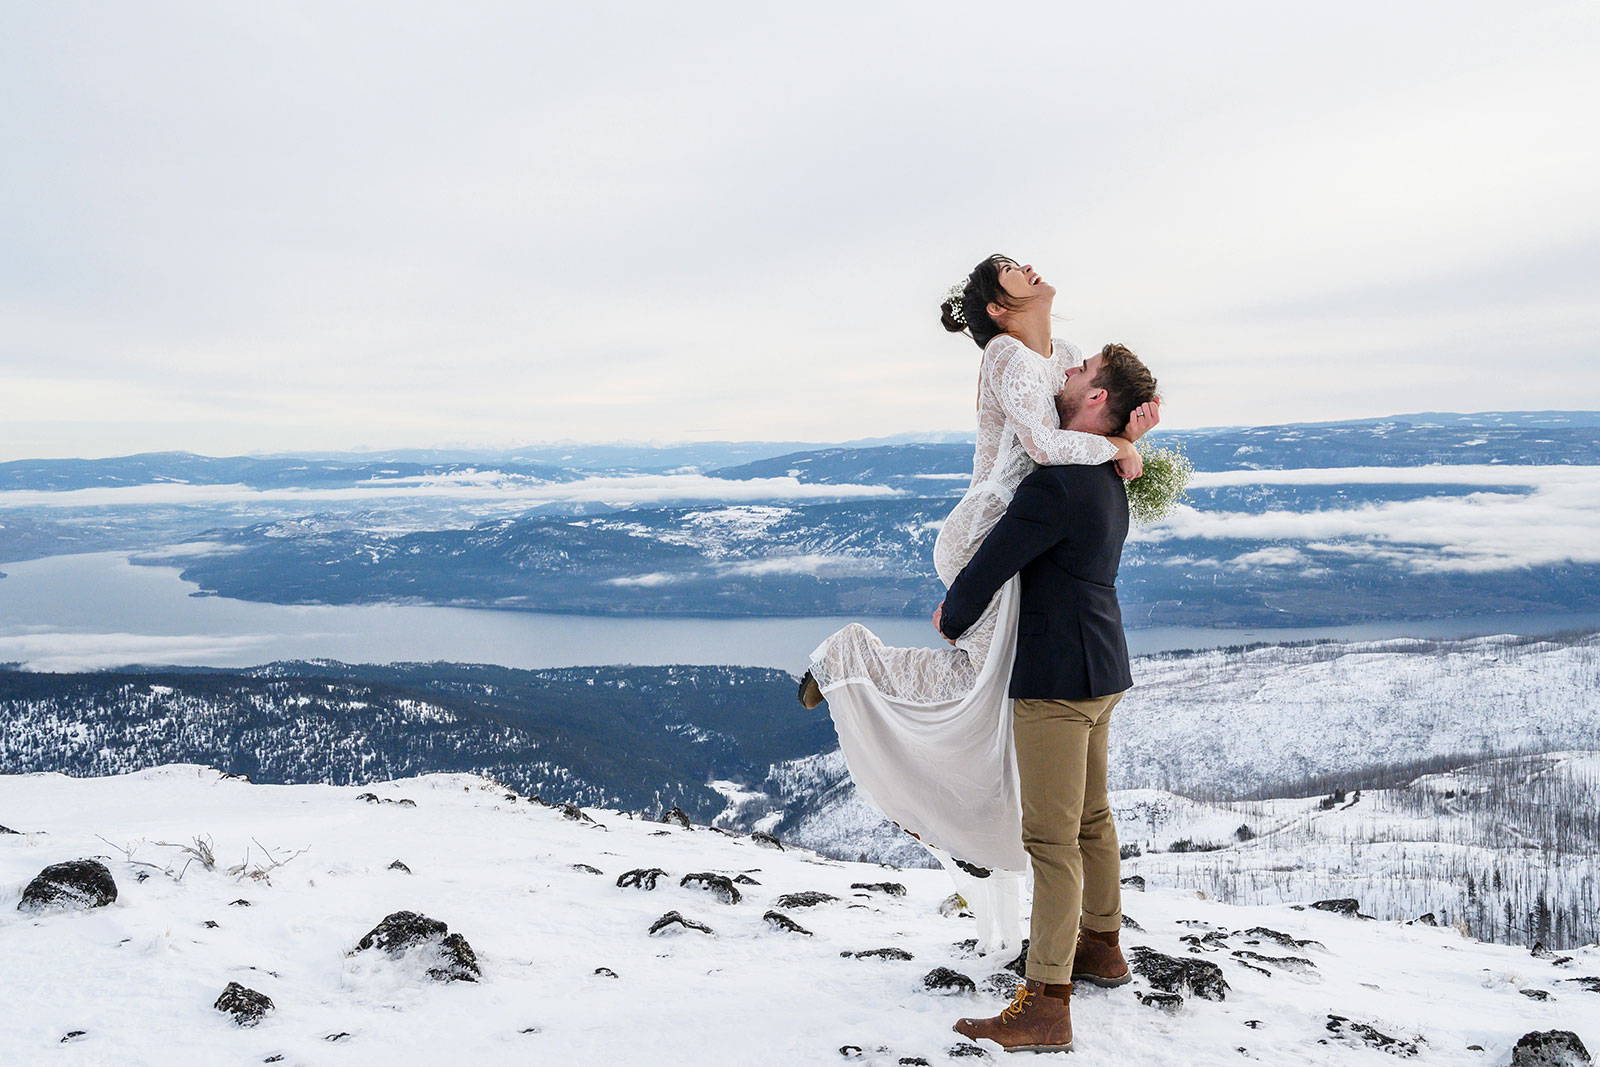 Groom, lifting the bride in the air, surrounded by snowy mountains